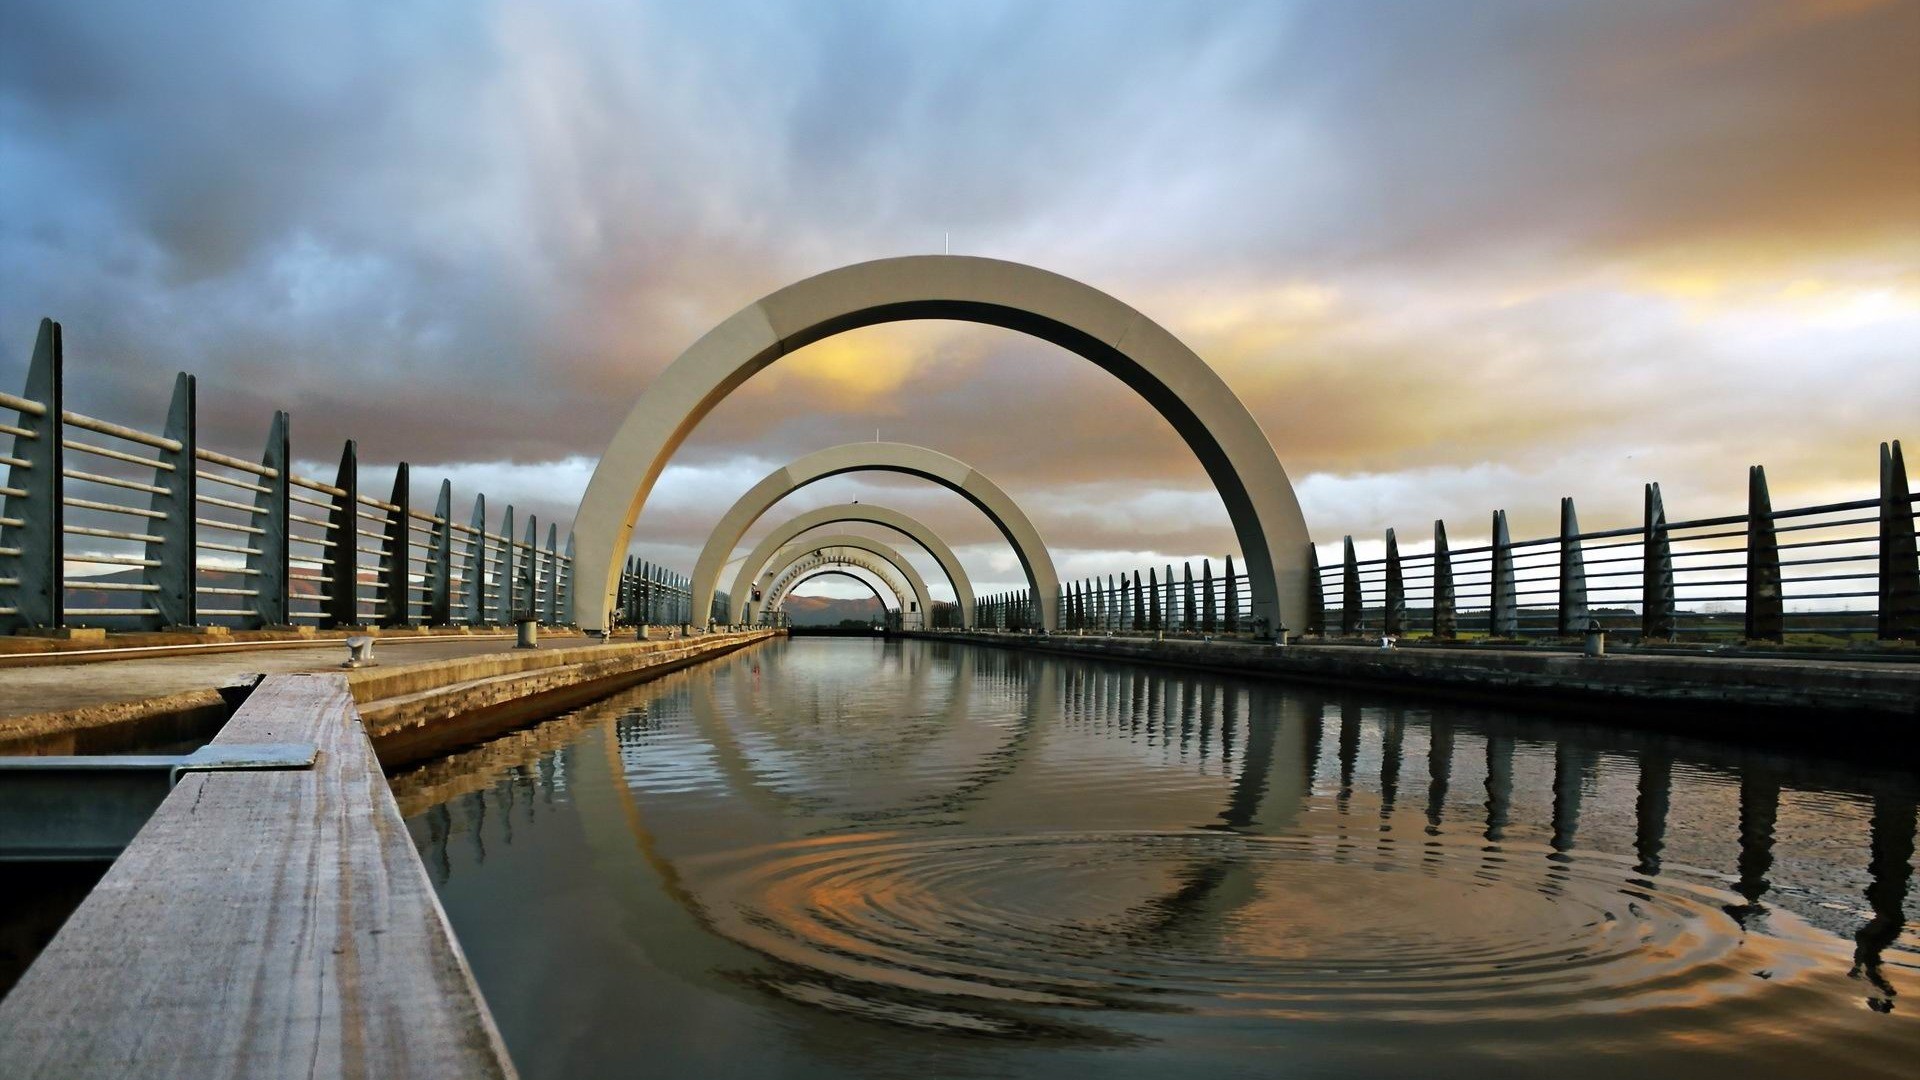 Architecture Water Canal Wheels Falkirk Wheel Scotland UK Reflection Fence Clouds Arch Ripples 1920x1080